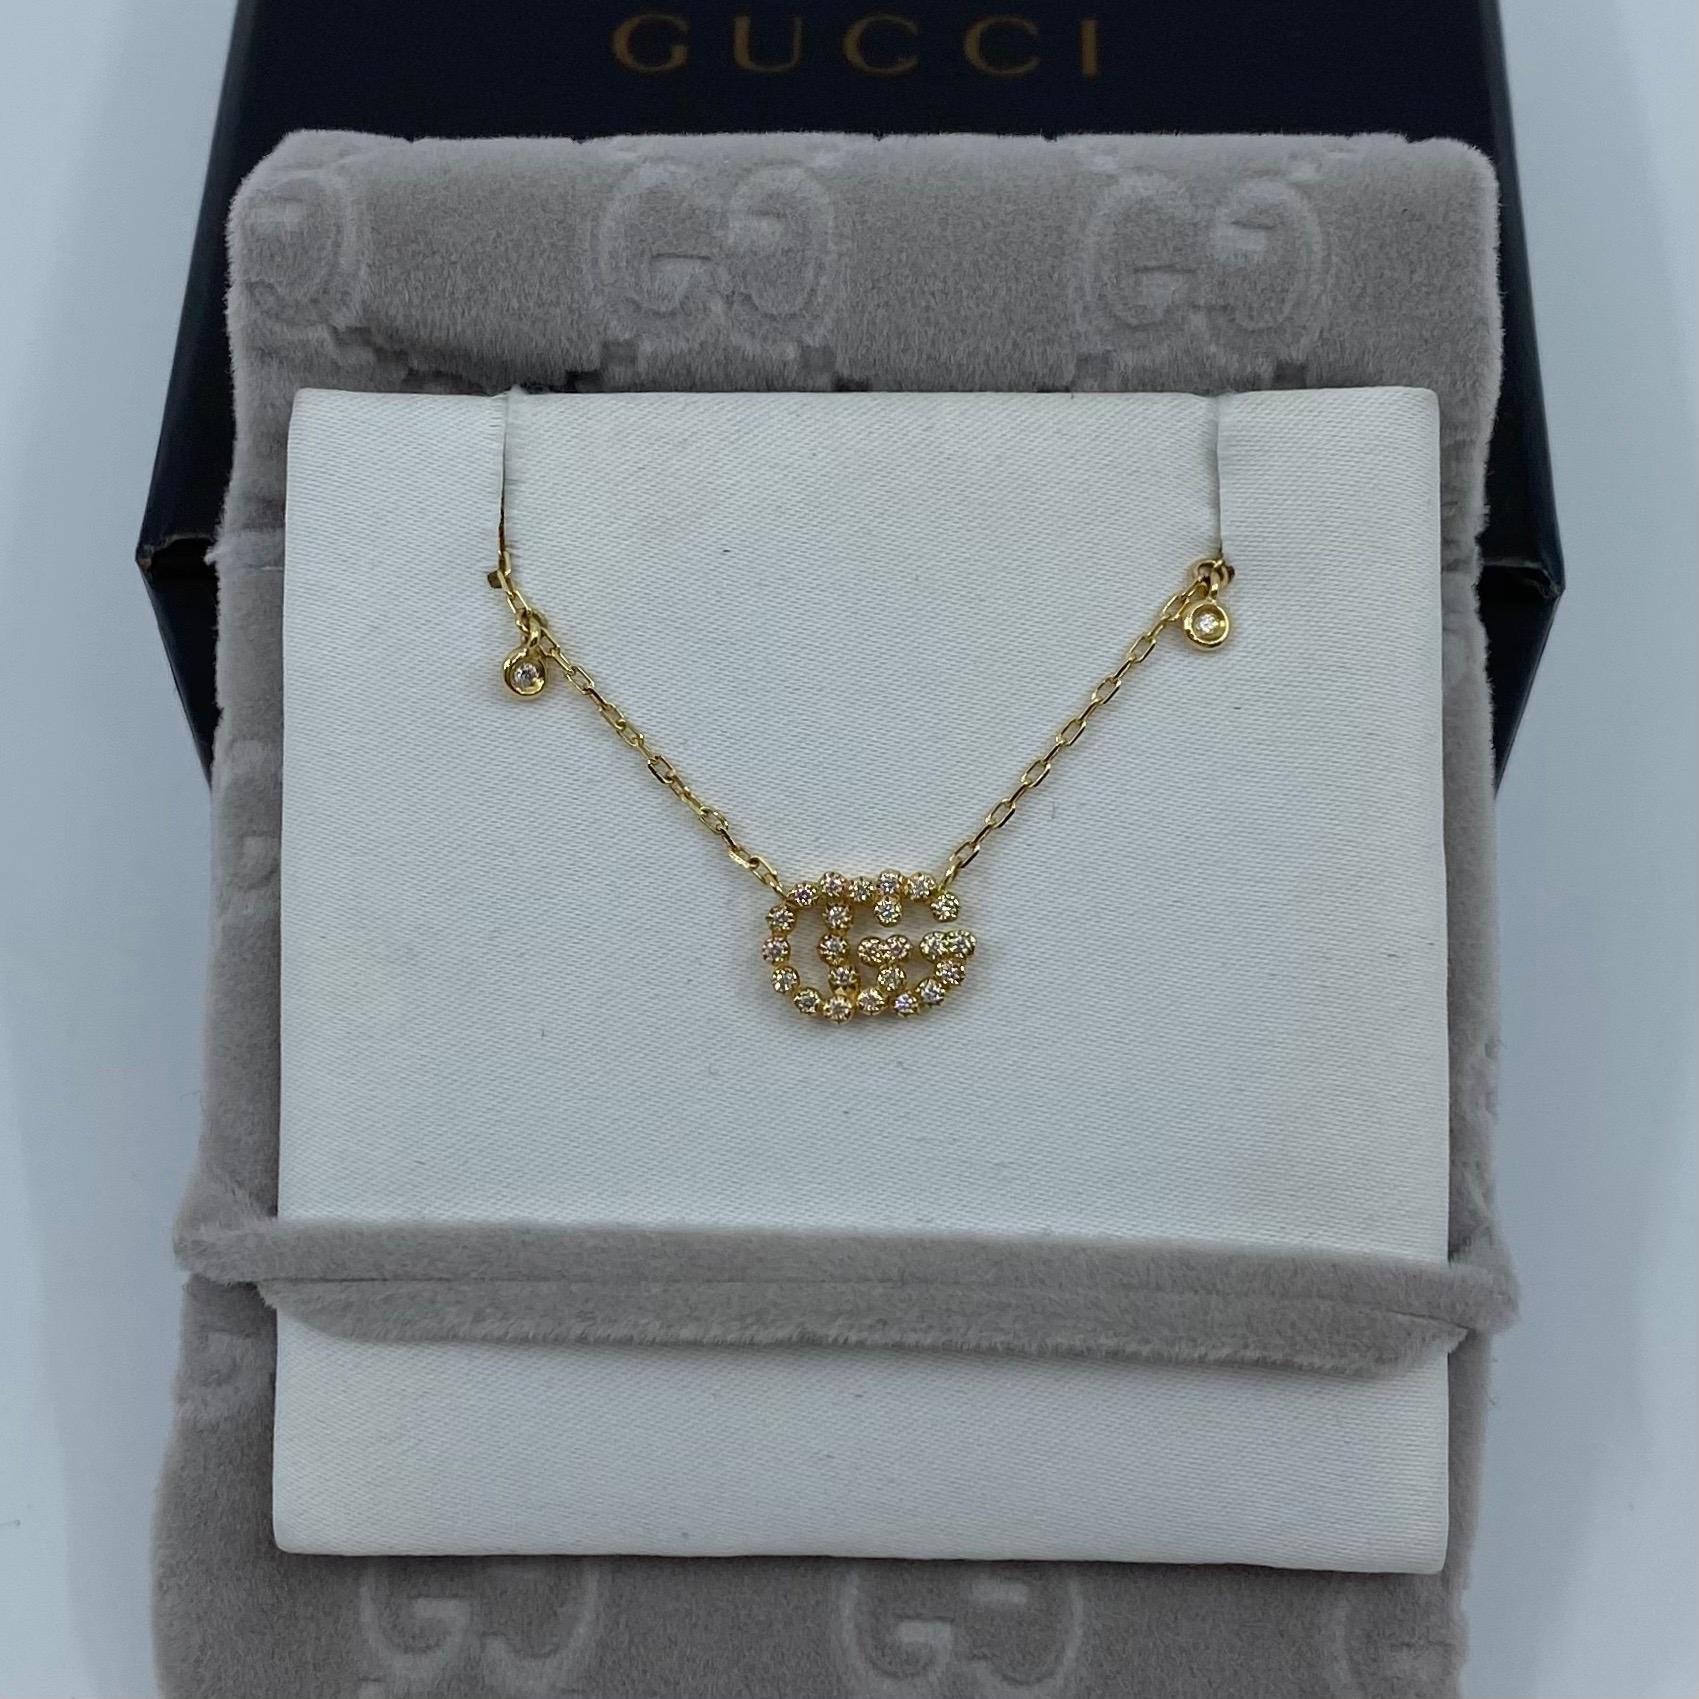 Round Cut Brand New with Tags Gucci GG Logo Running Diamond Necklace 18 Karat Yellow Gold